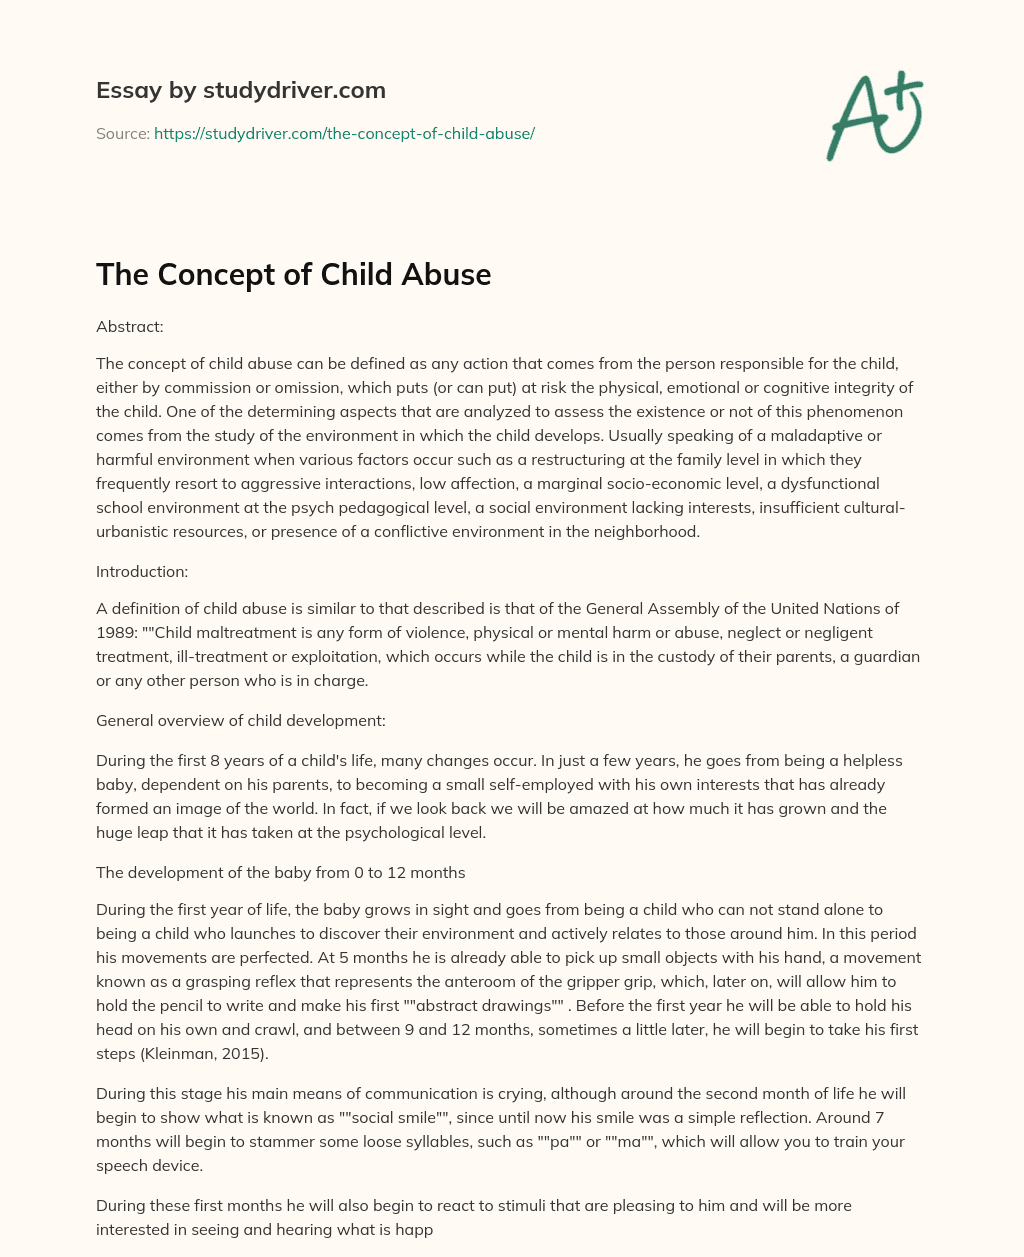 The Concept of Child Abuse essay